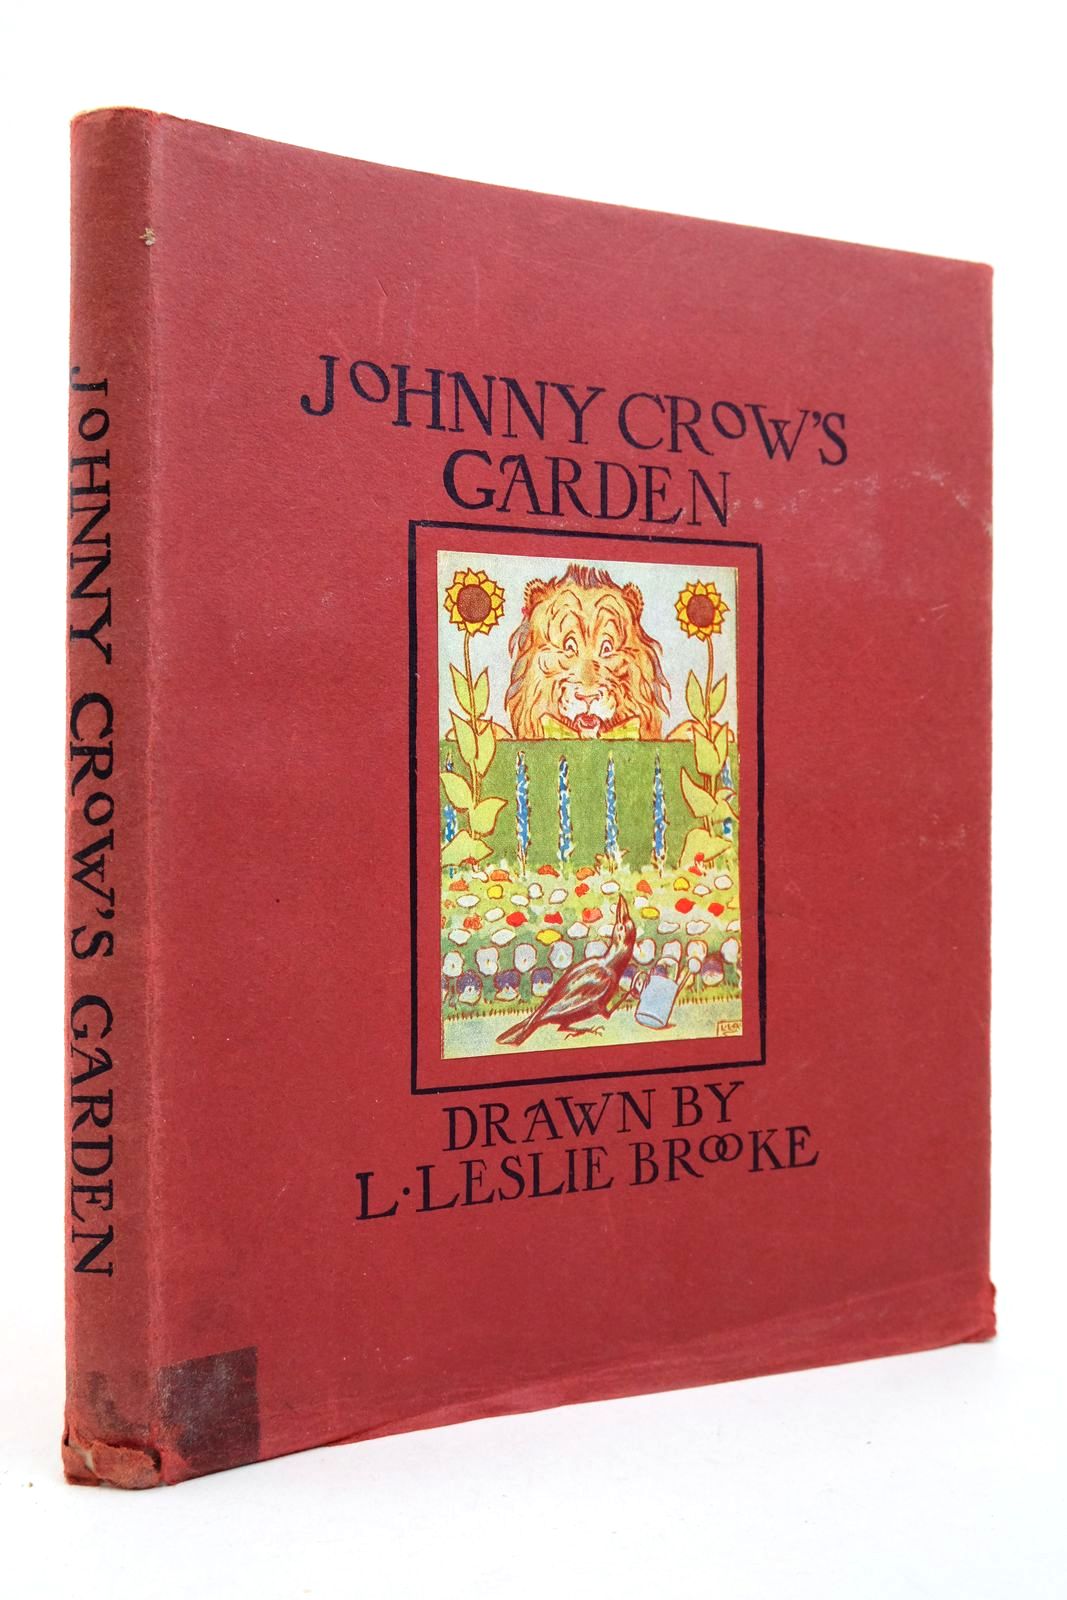 Photo of JOHNNY CROW'S GARDEN A PICTURE BOOK written by Brooke, L. Leslie illustrated by Brooke, L. Leslie published by Frederick Warne &amp; Co Ltd. (STOCK CODE: 2140507)  for sale by Stella & Rose's Books